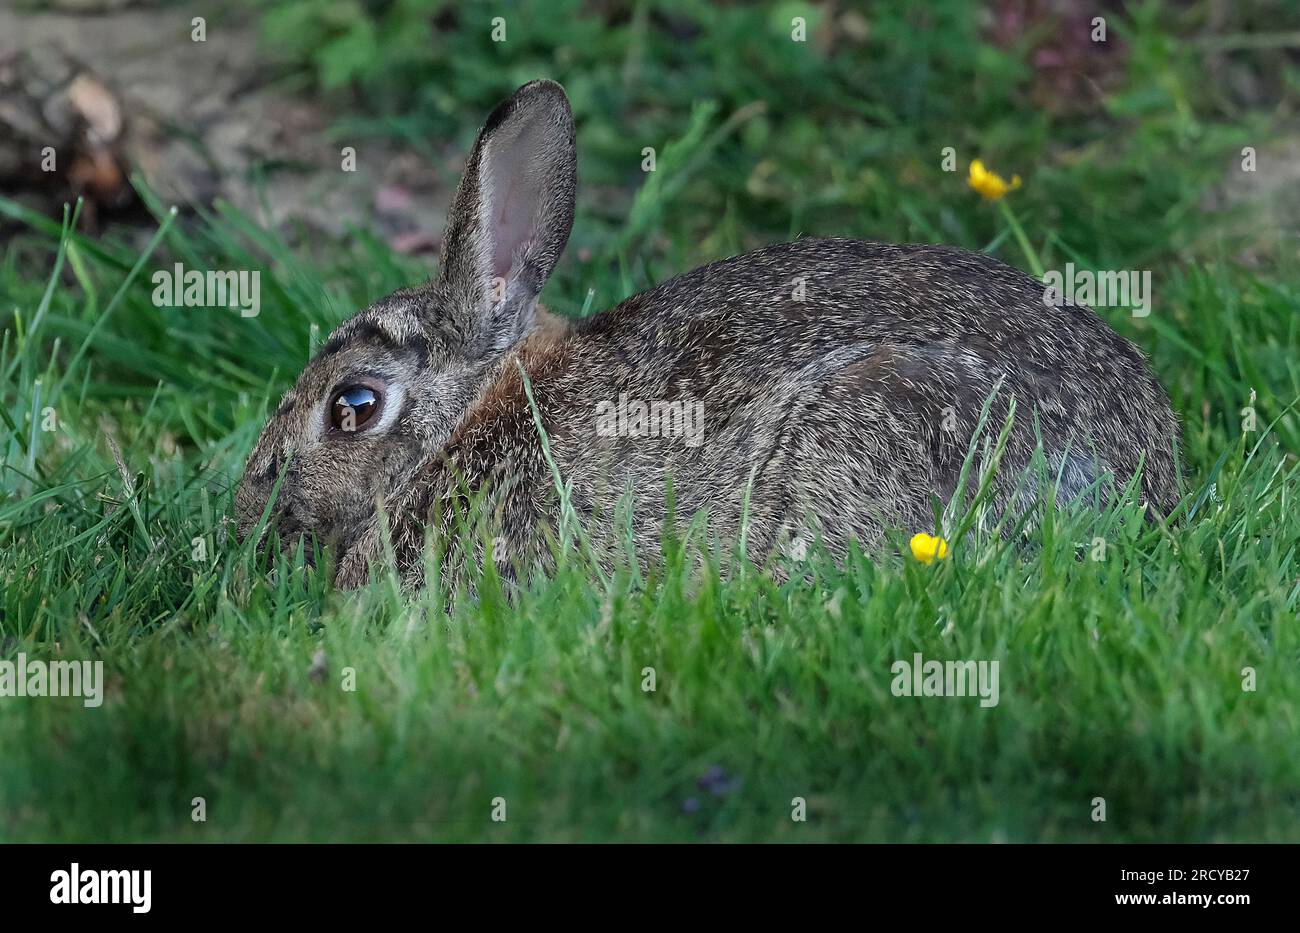 The European rabbit or coney is a species of rabbit native to the ...